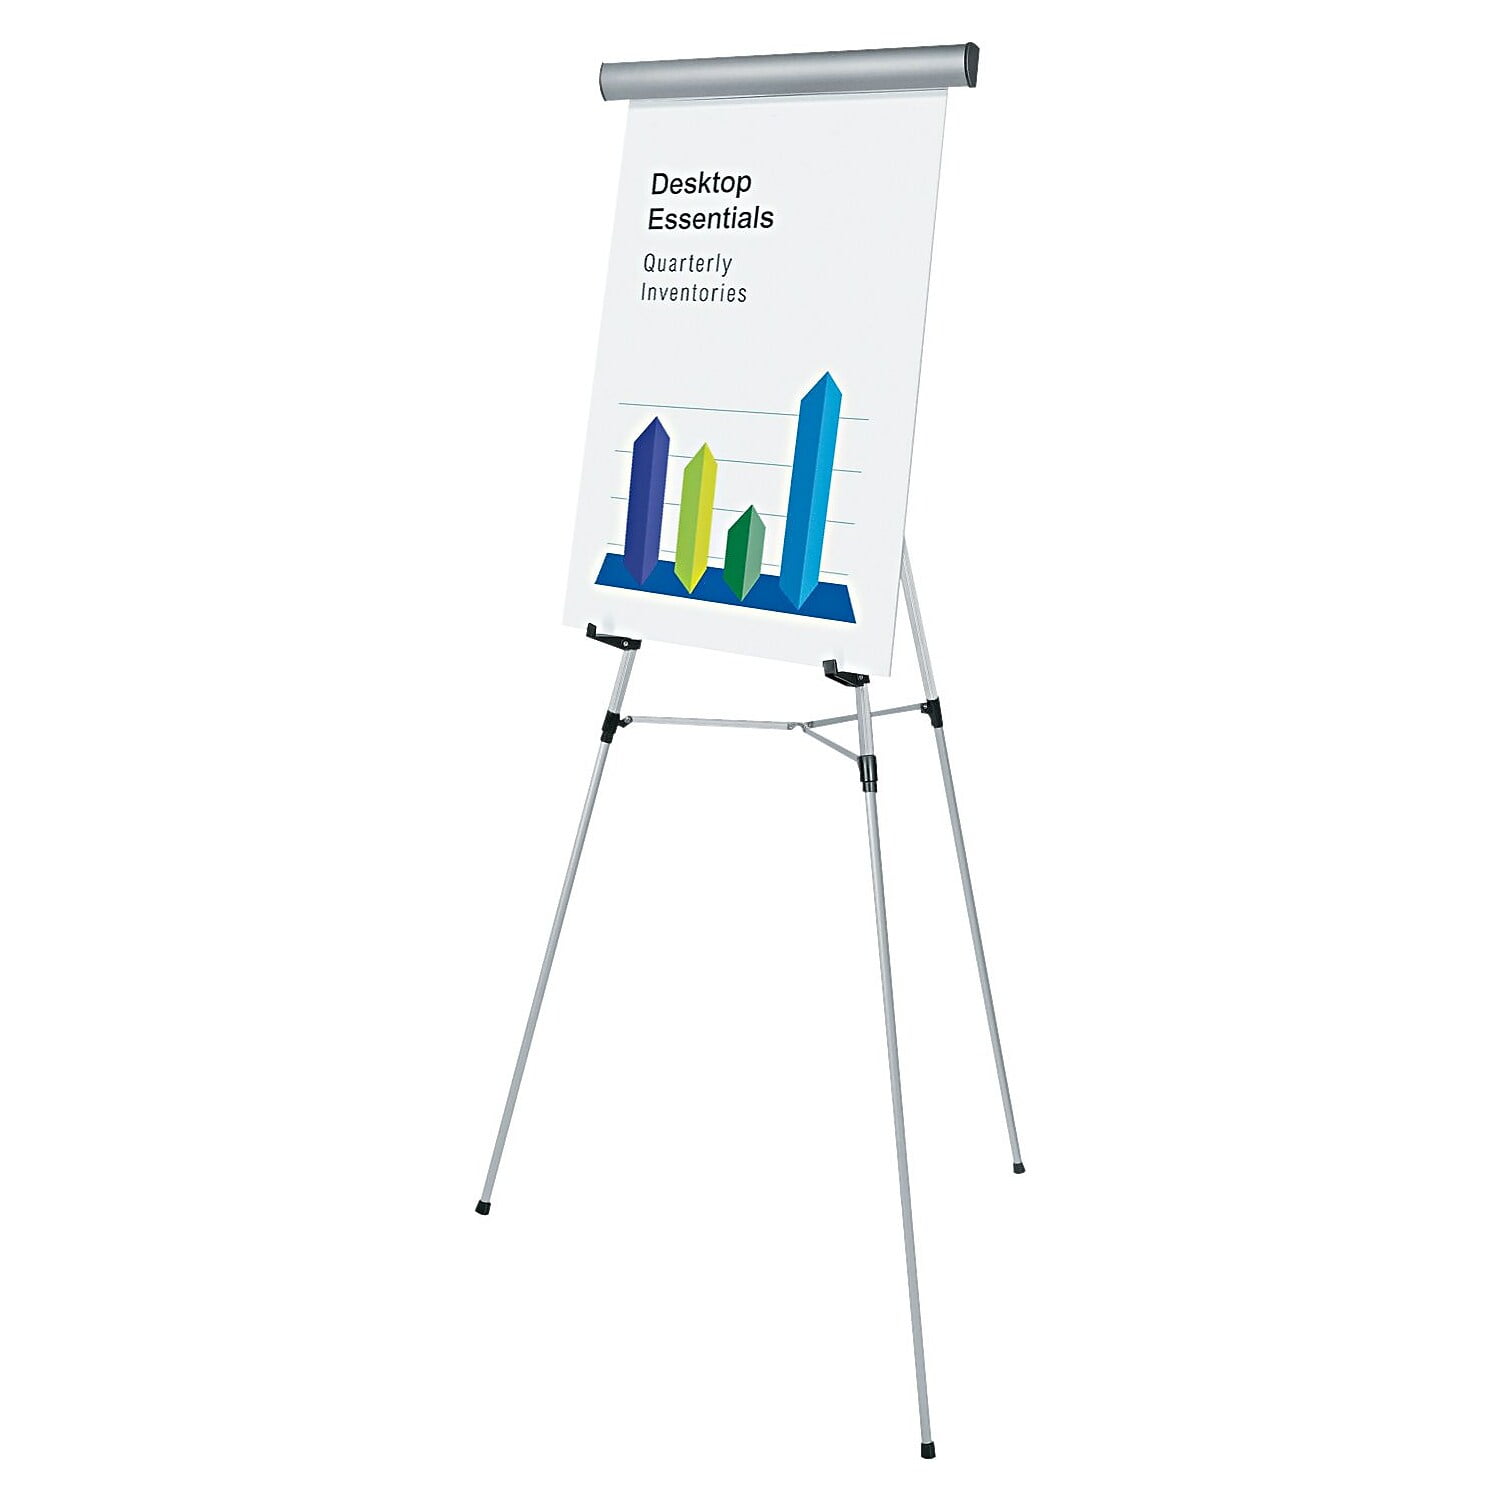 3-Leg Telescoping Easel with Pad Retainer by Universal® UNV43150